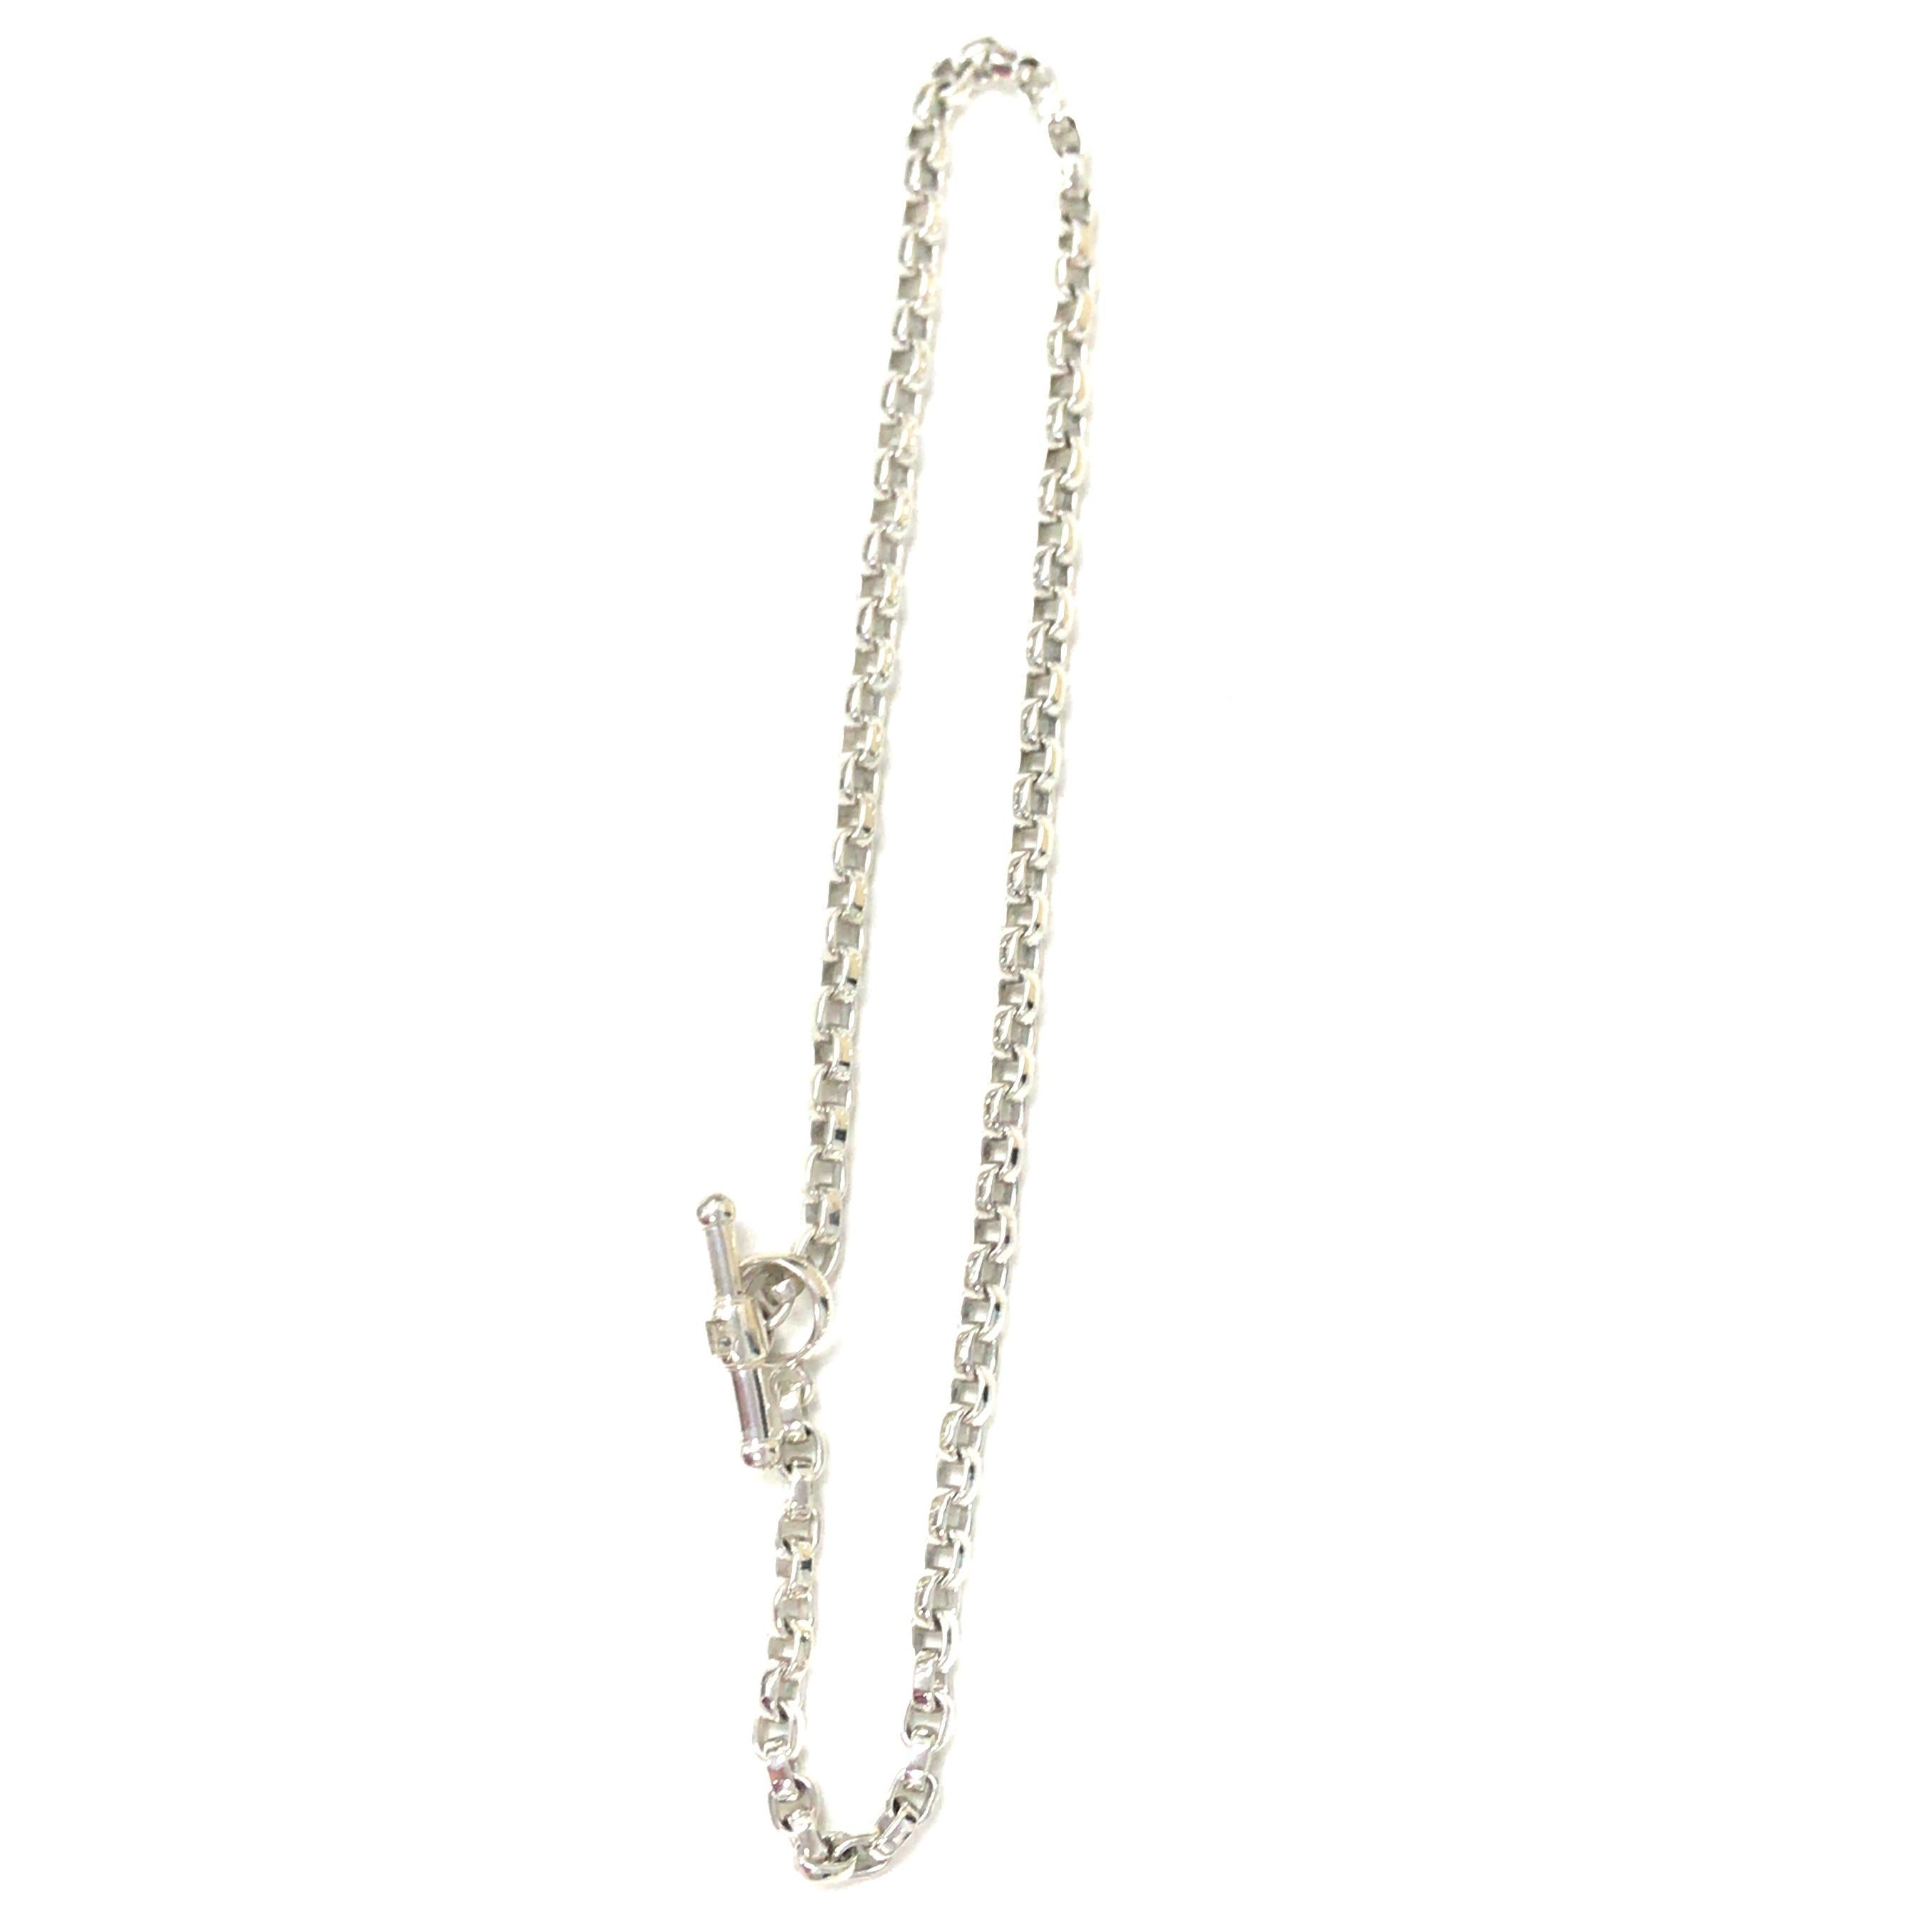 Barry Kieselstein-Cord Toggle Necklace in Sterling Silver.  The Necklace measures 18 inch in length and 1/4 in width.  48 grams.  Stamped 